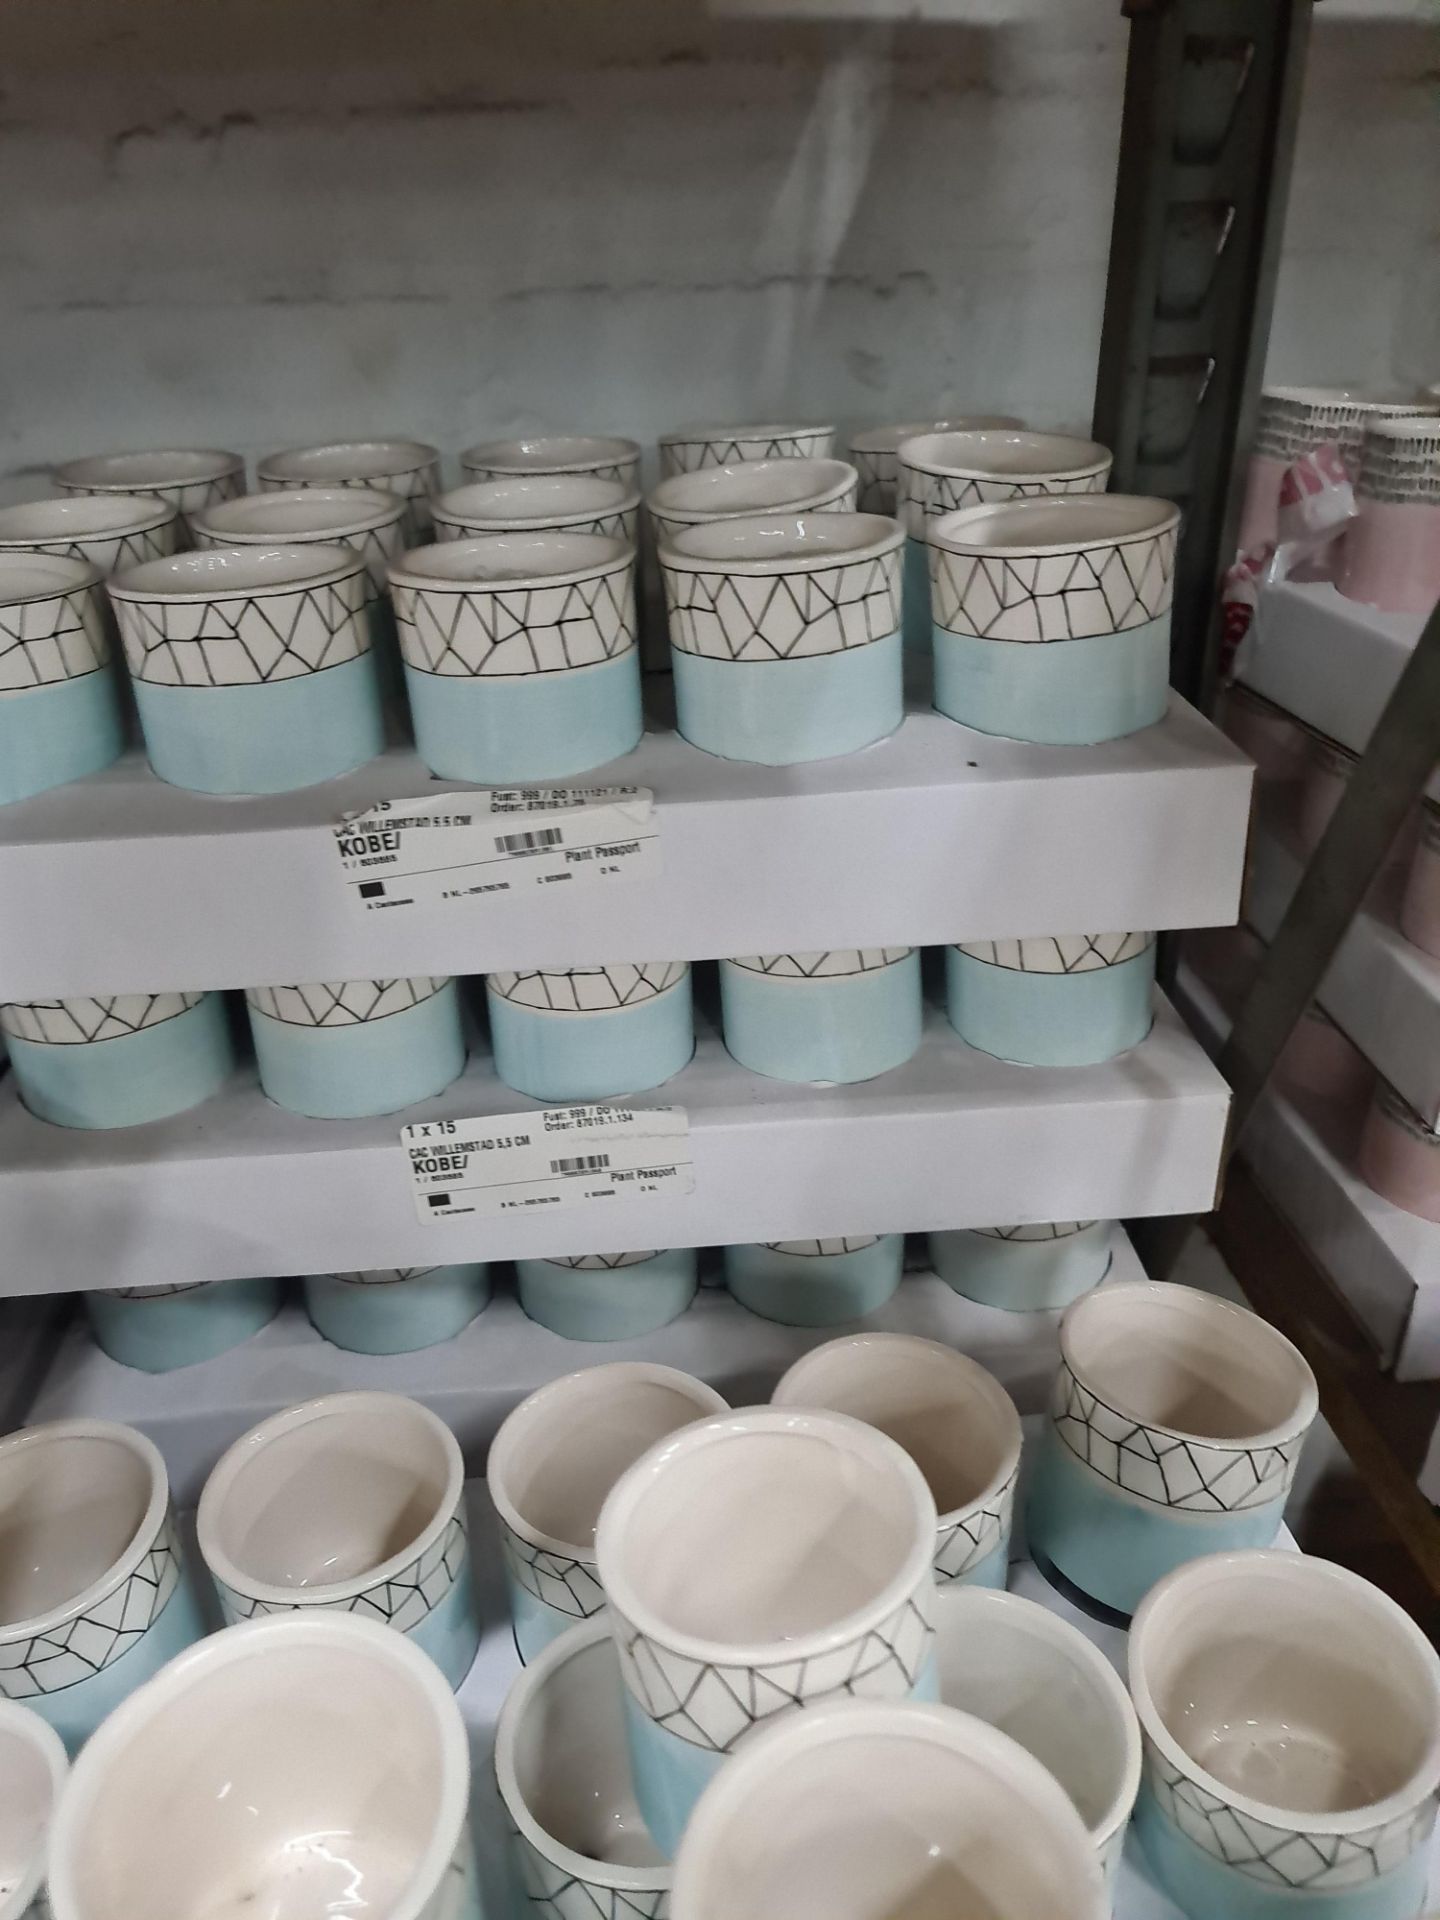 4 trays of Kobe 5.5cm blue patterned pots each standing on 3 legs, approximately 63 pots in total - Image 5 of 6